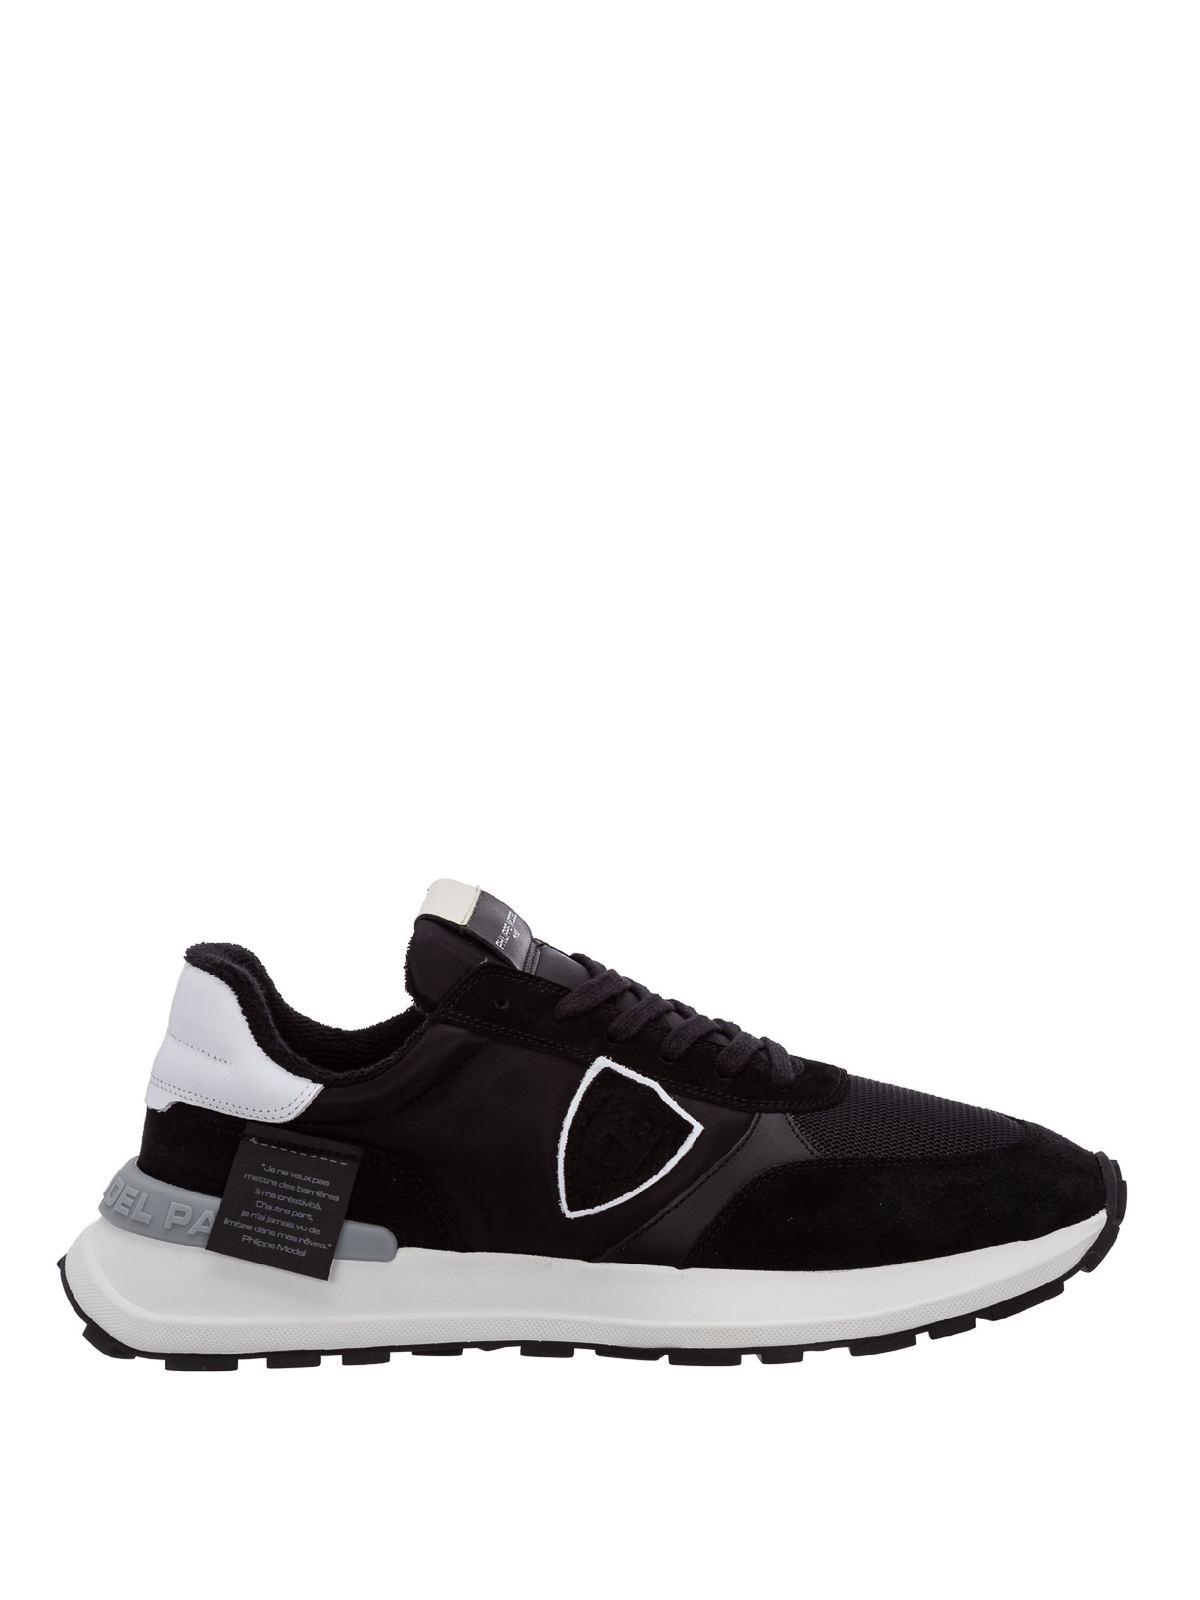 Shop Philippe Model Antibes Mondial Sneakers In Negro